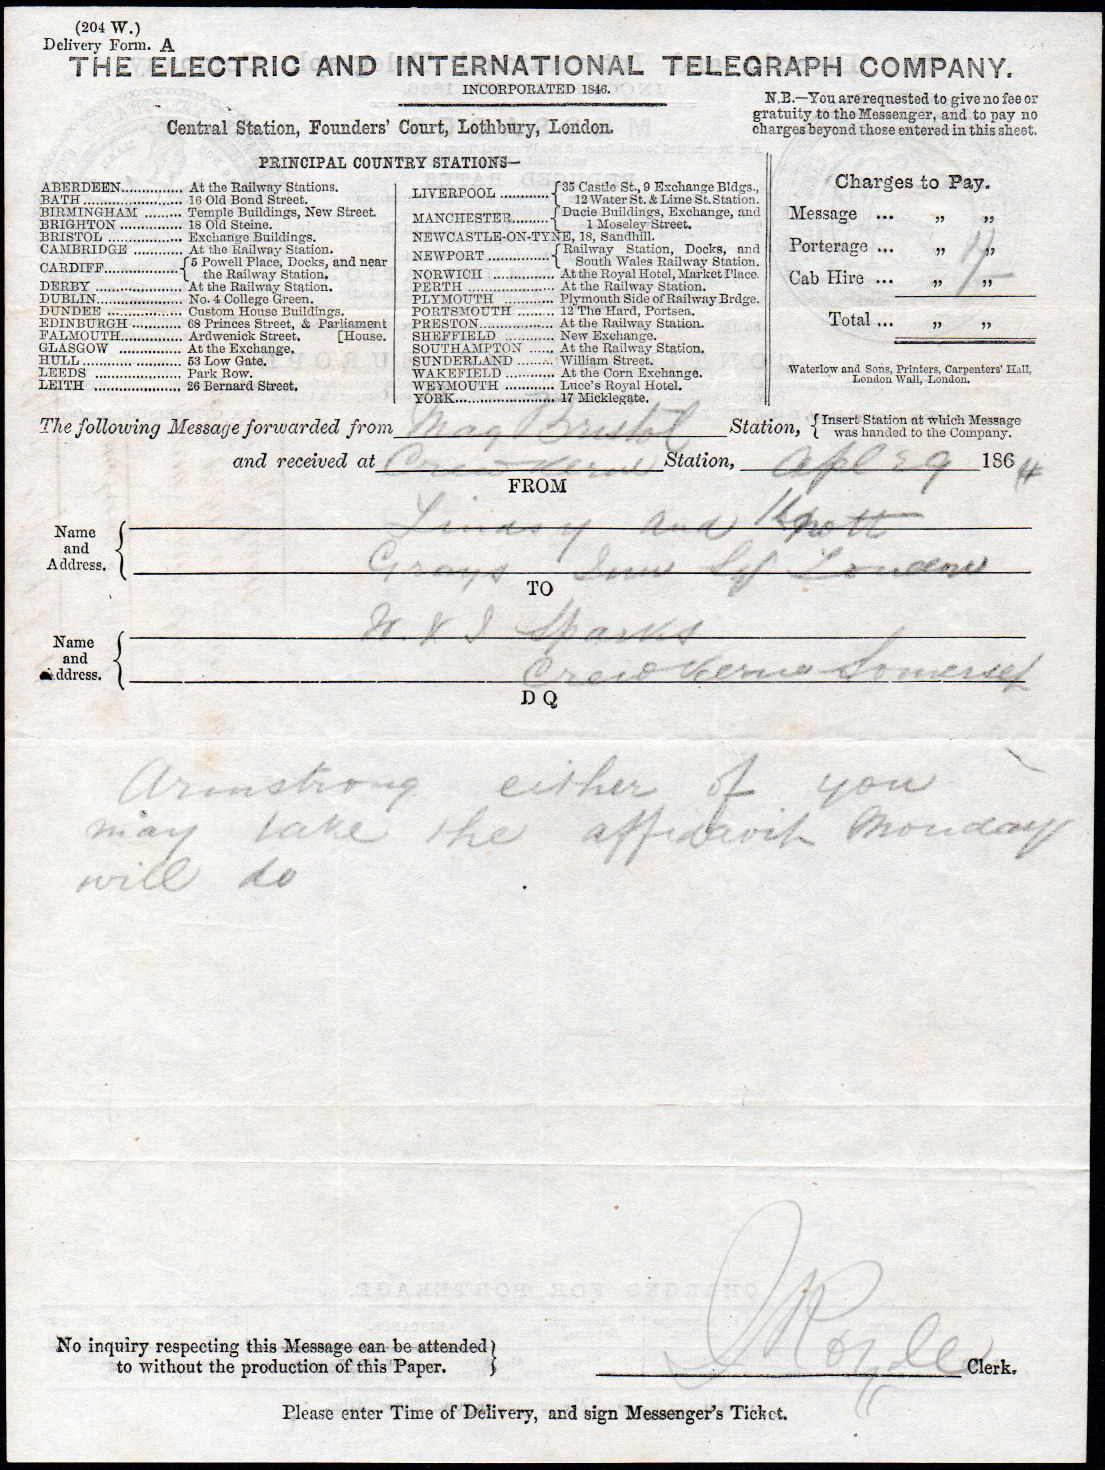 Electric Telegraph Company Form A - 1863 front.